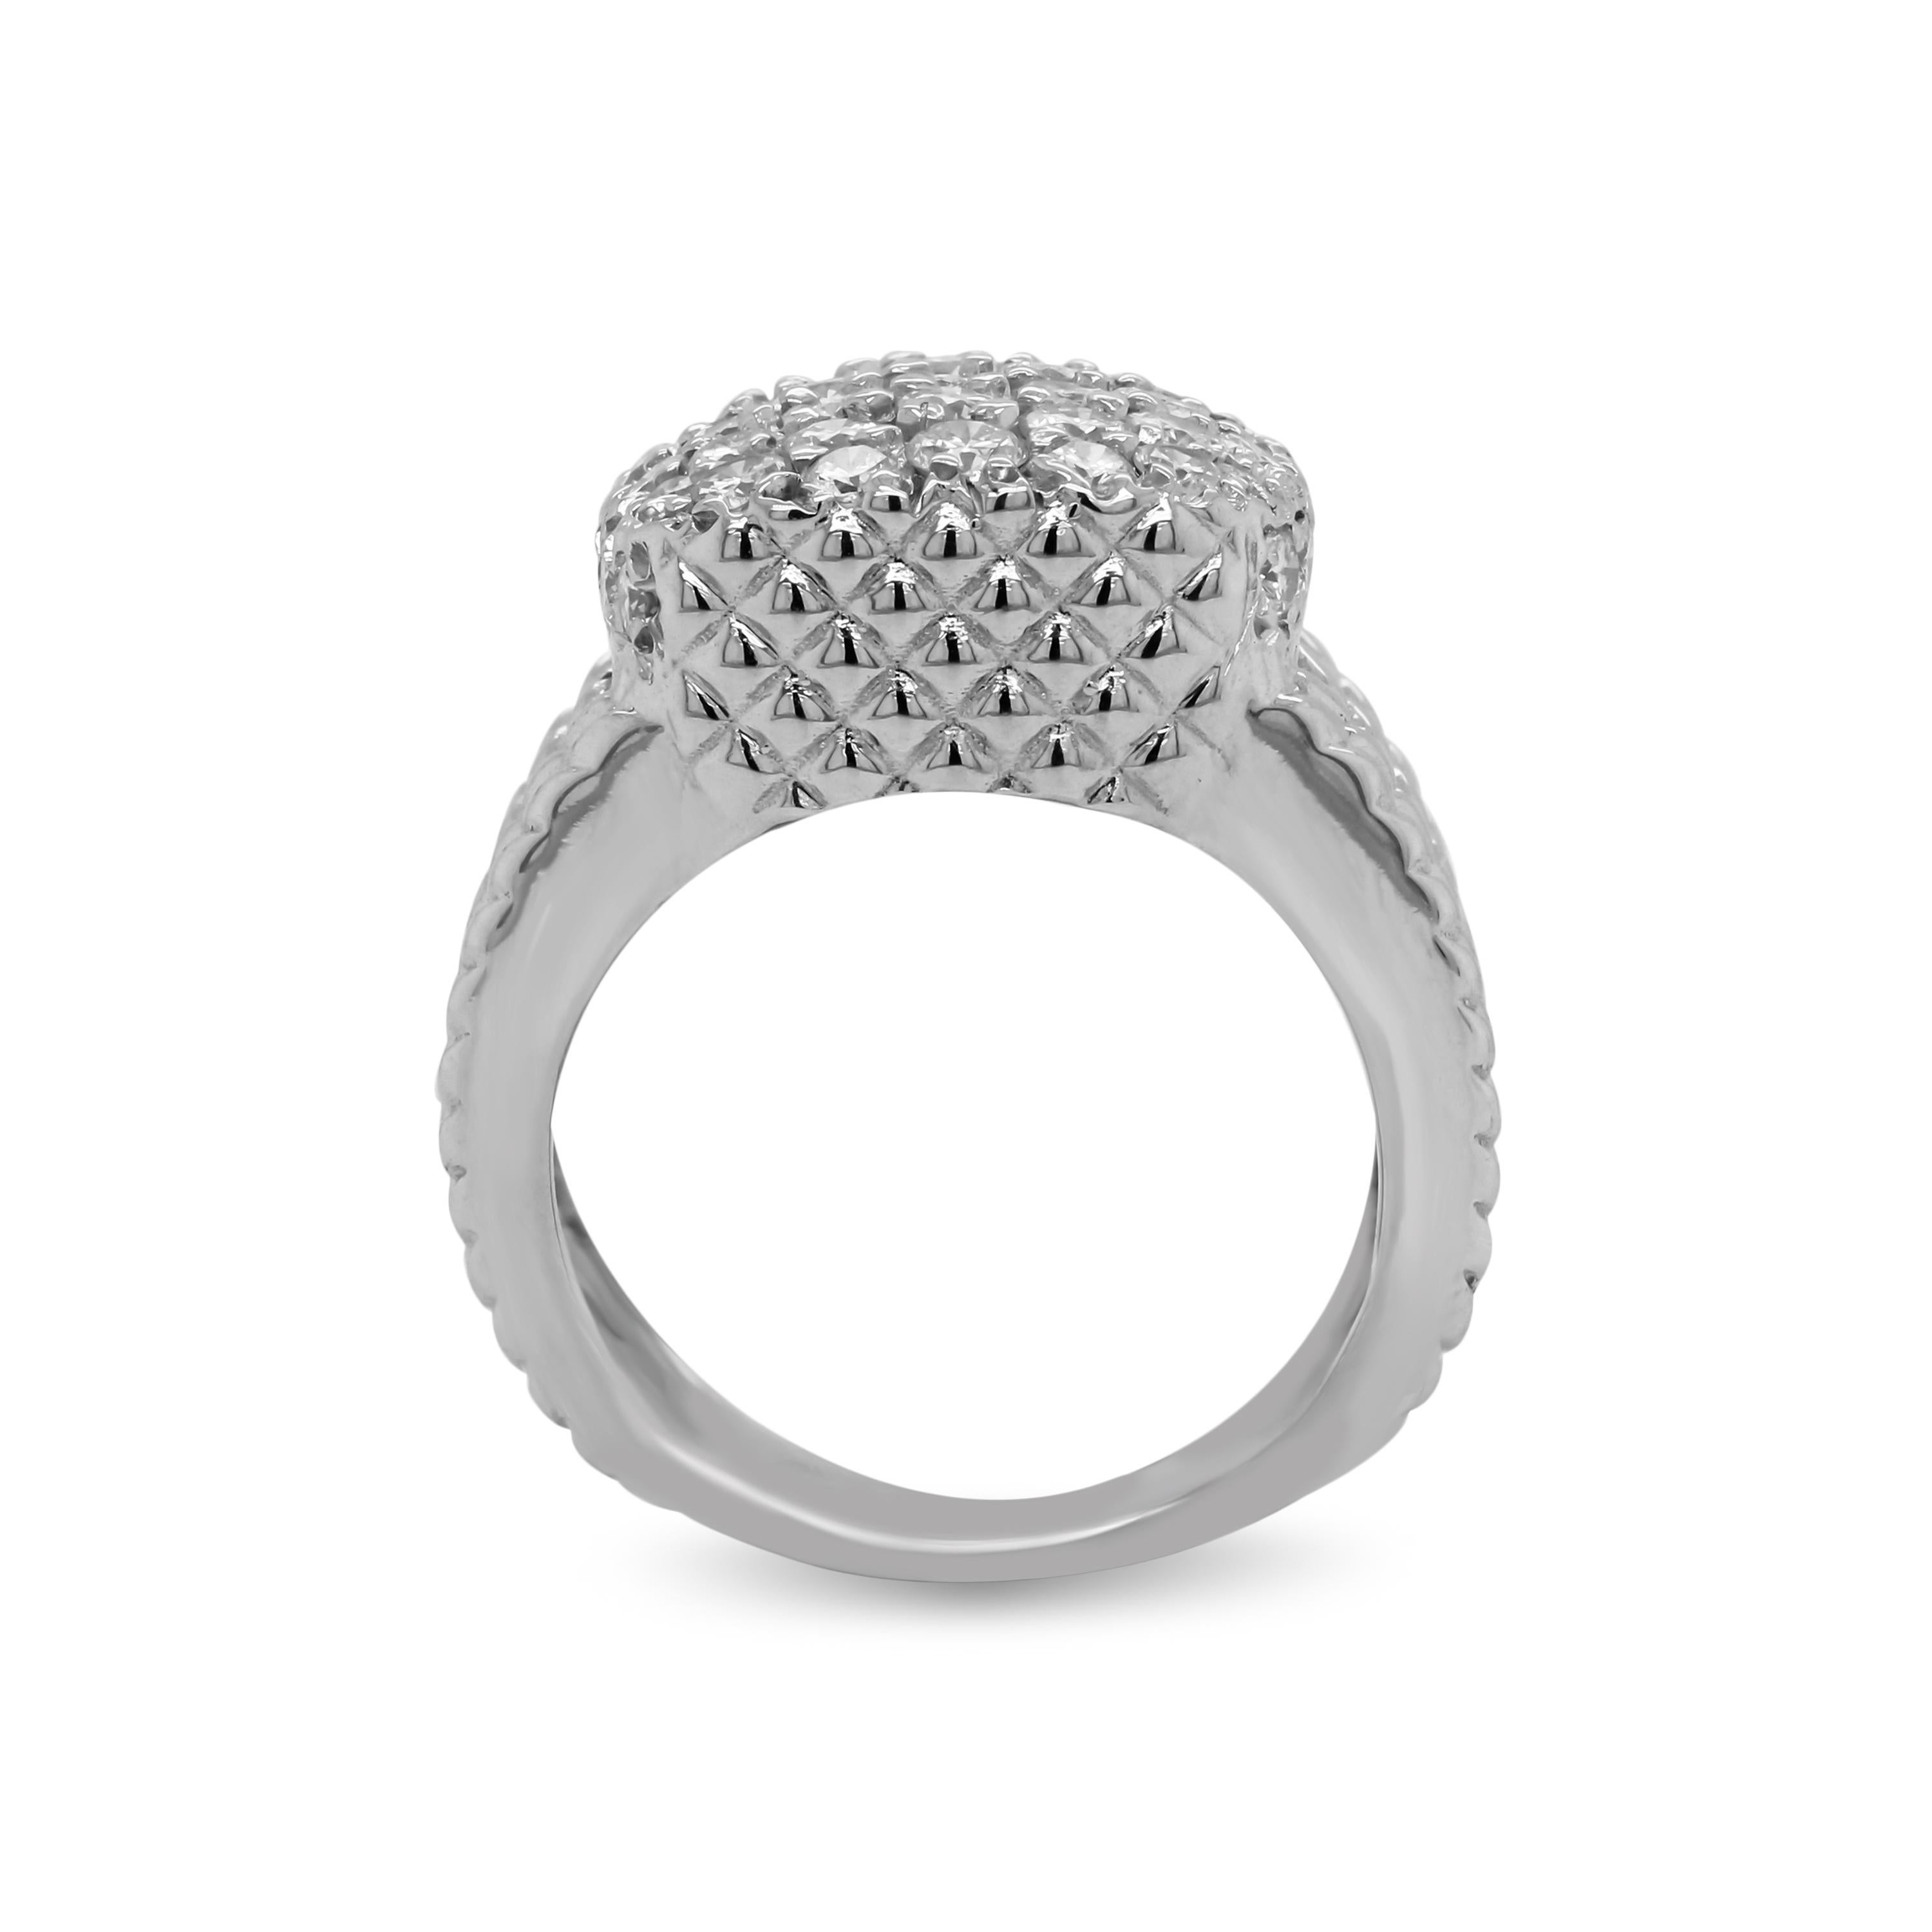 14k White Gold and Pavé Set Diamonds Cable Band Mens Ring

This fun and everyday mens ring features three cable-design bands that make their way to pavé set diamonds on the face of the ring

Apprx. 2.40 carat G color, VS clarity diamonds total